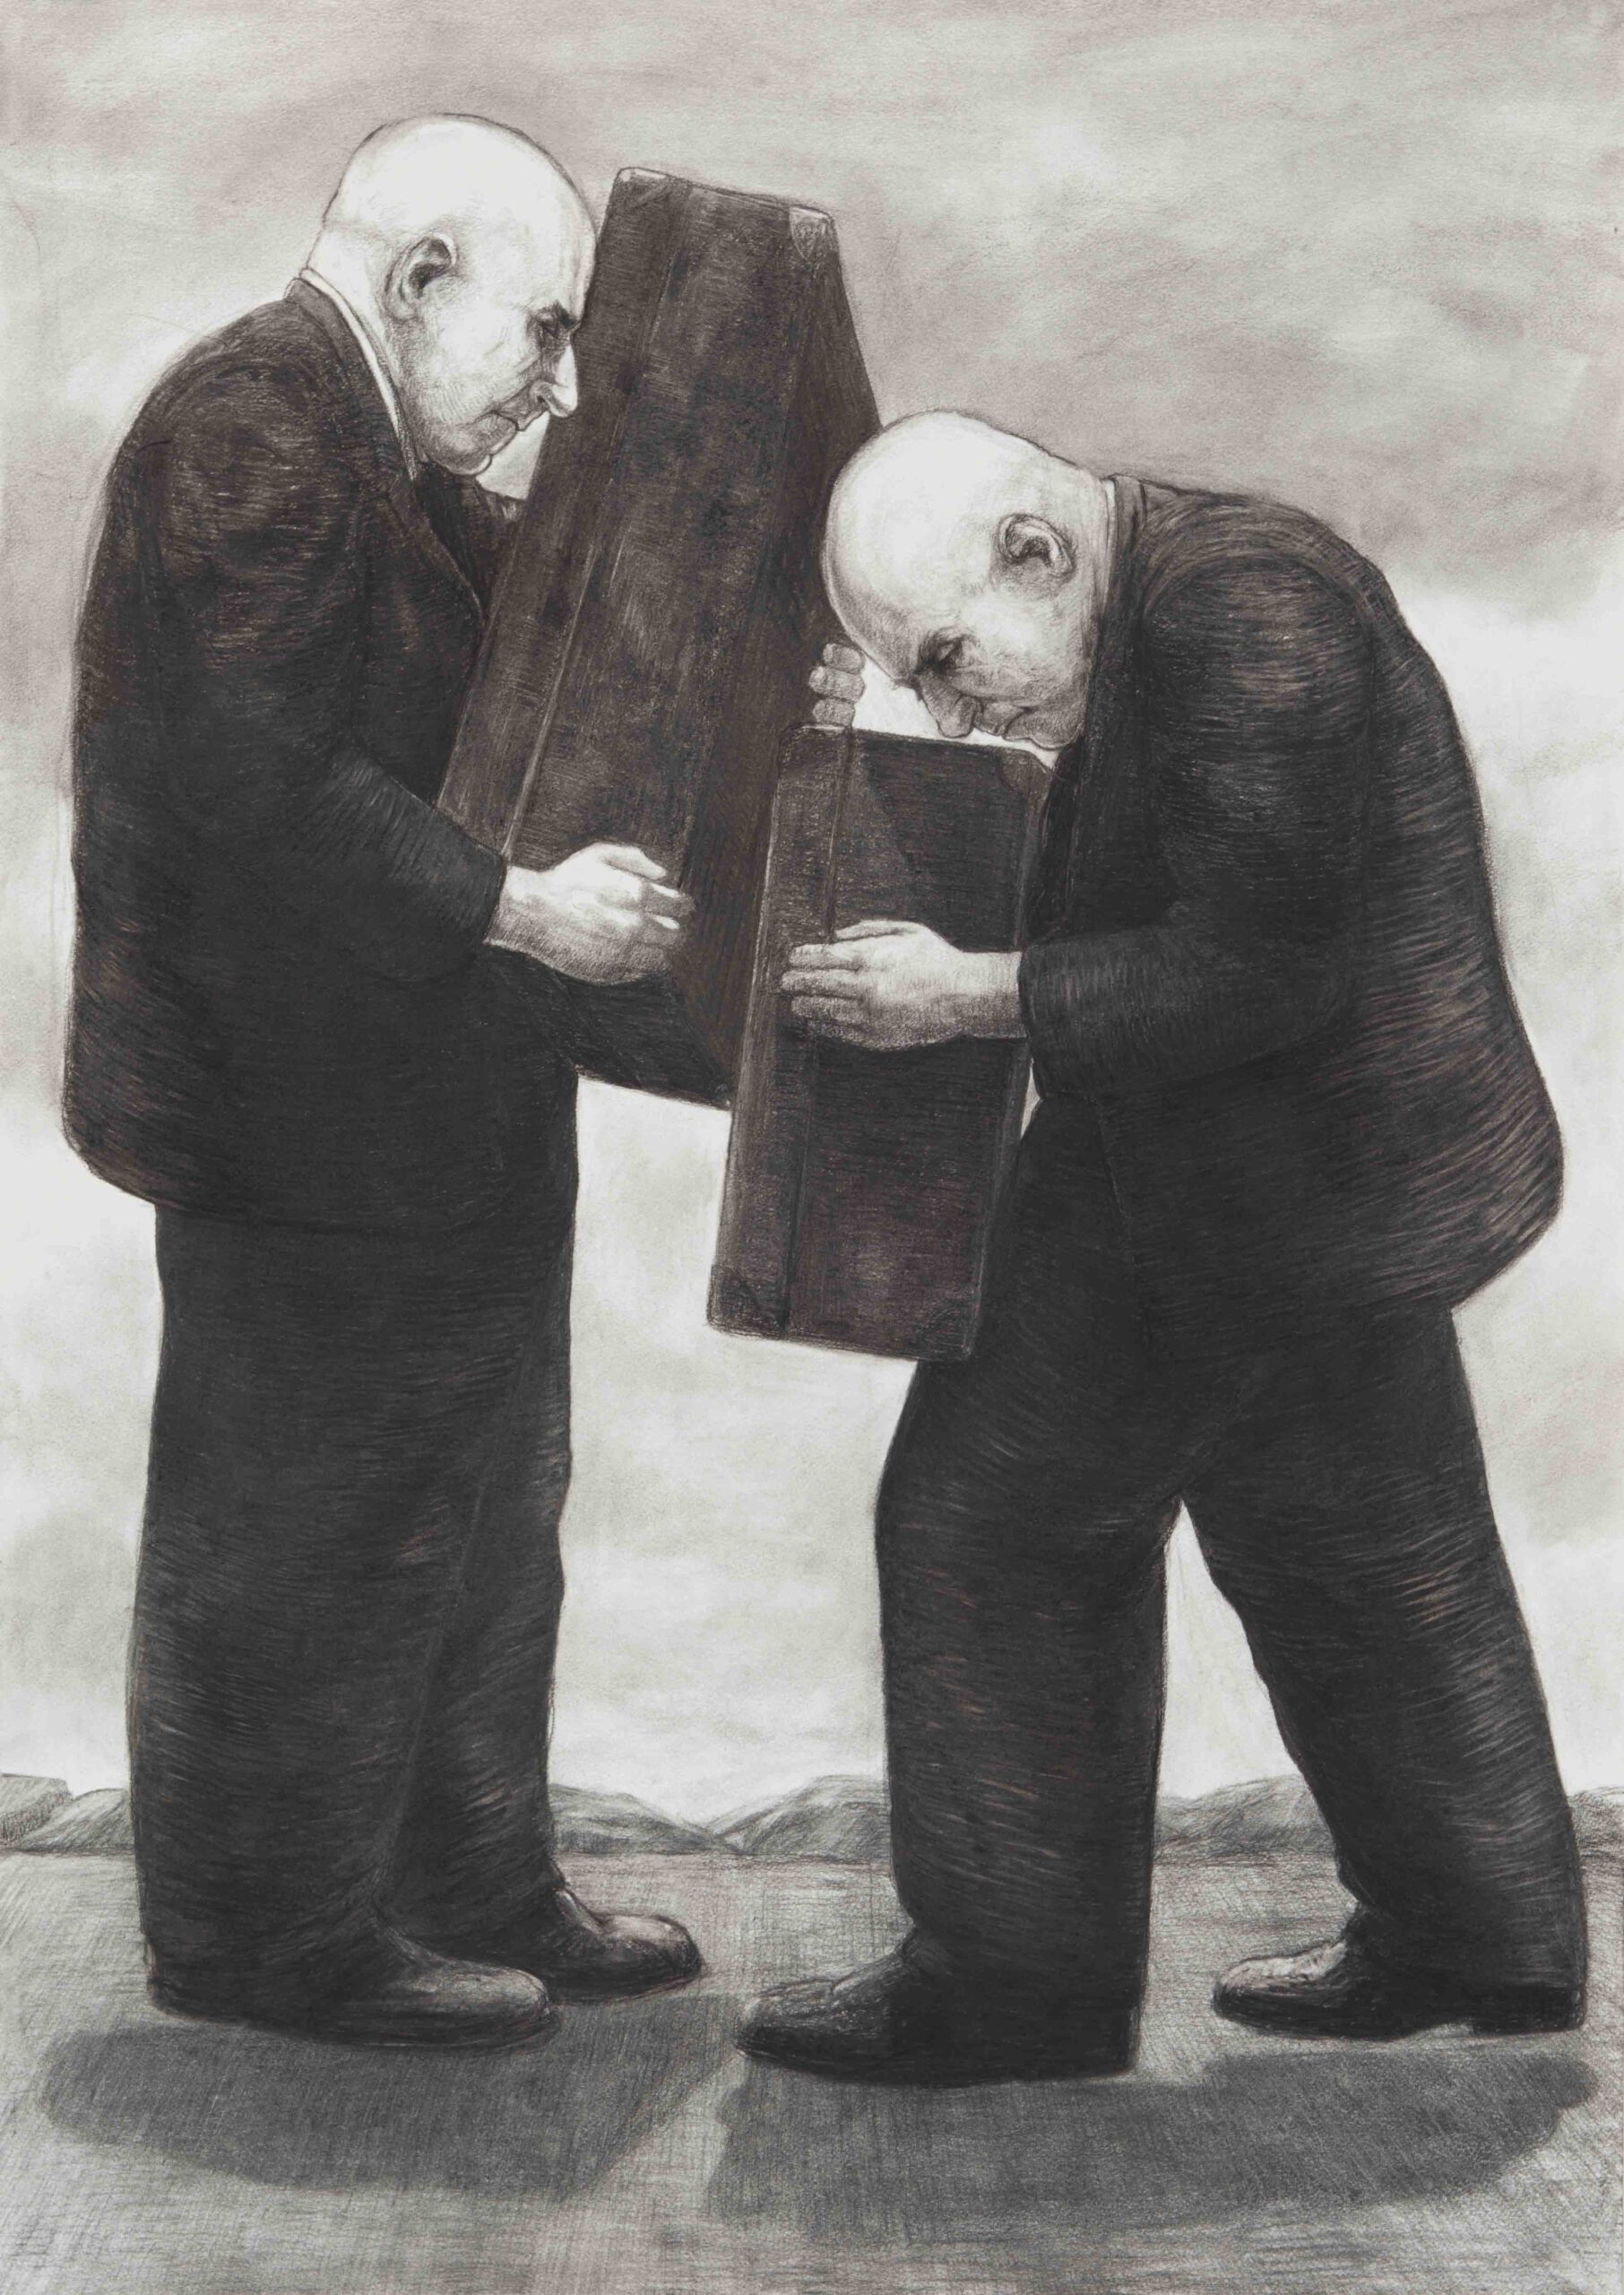 Christopher Orchard 'At The Border 2' charcoal on paper 140 x 110cm $17,500